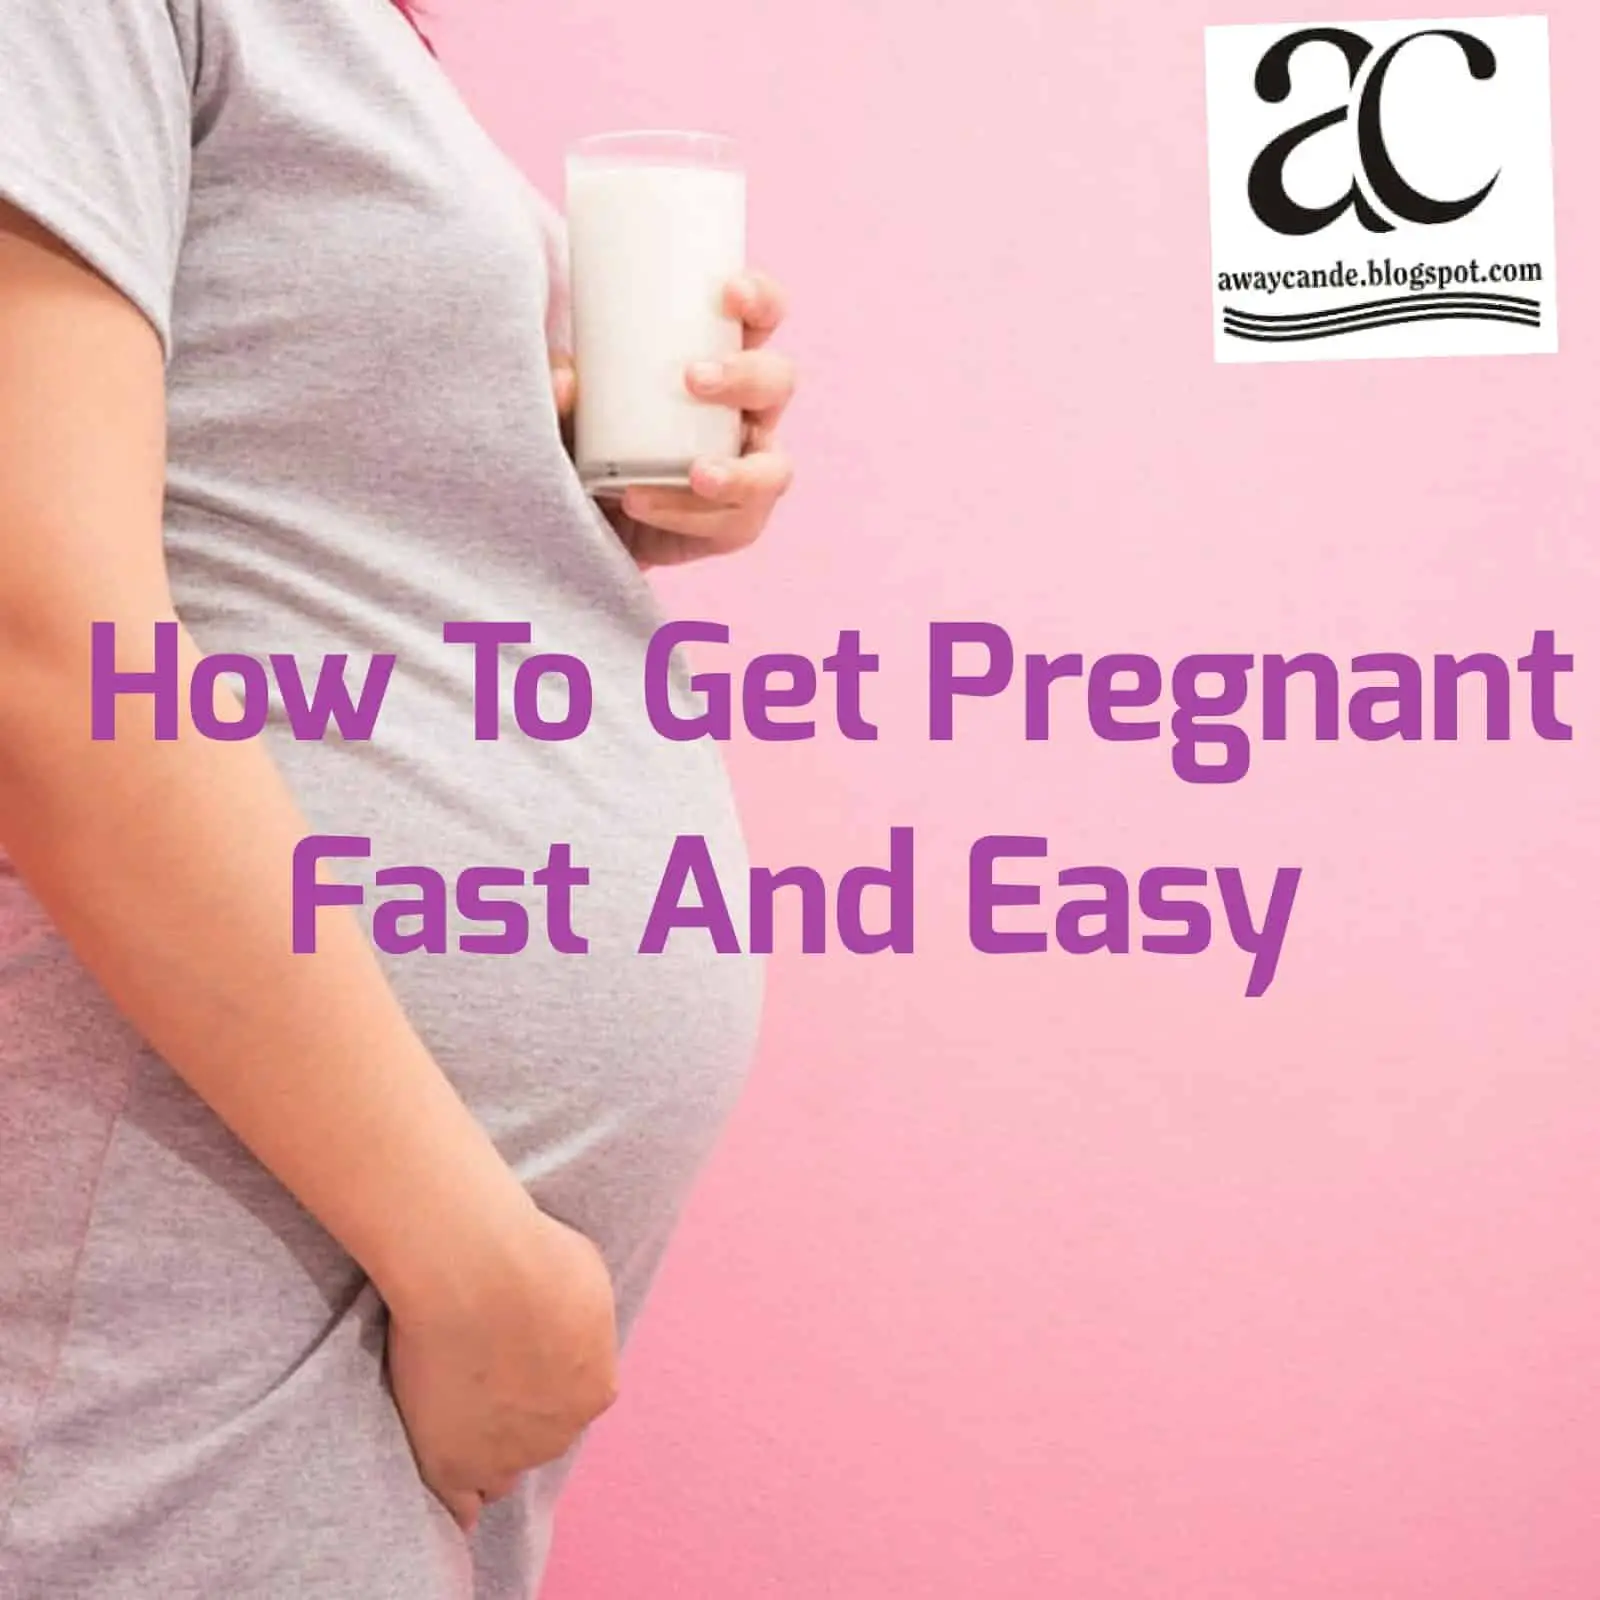 How To Get Pregnant Fast And Easy.